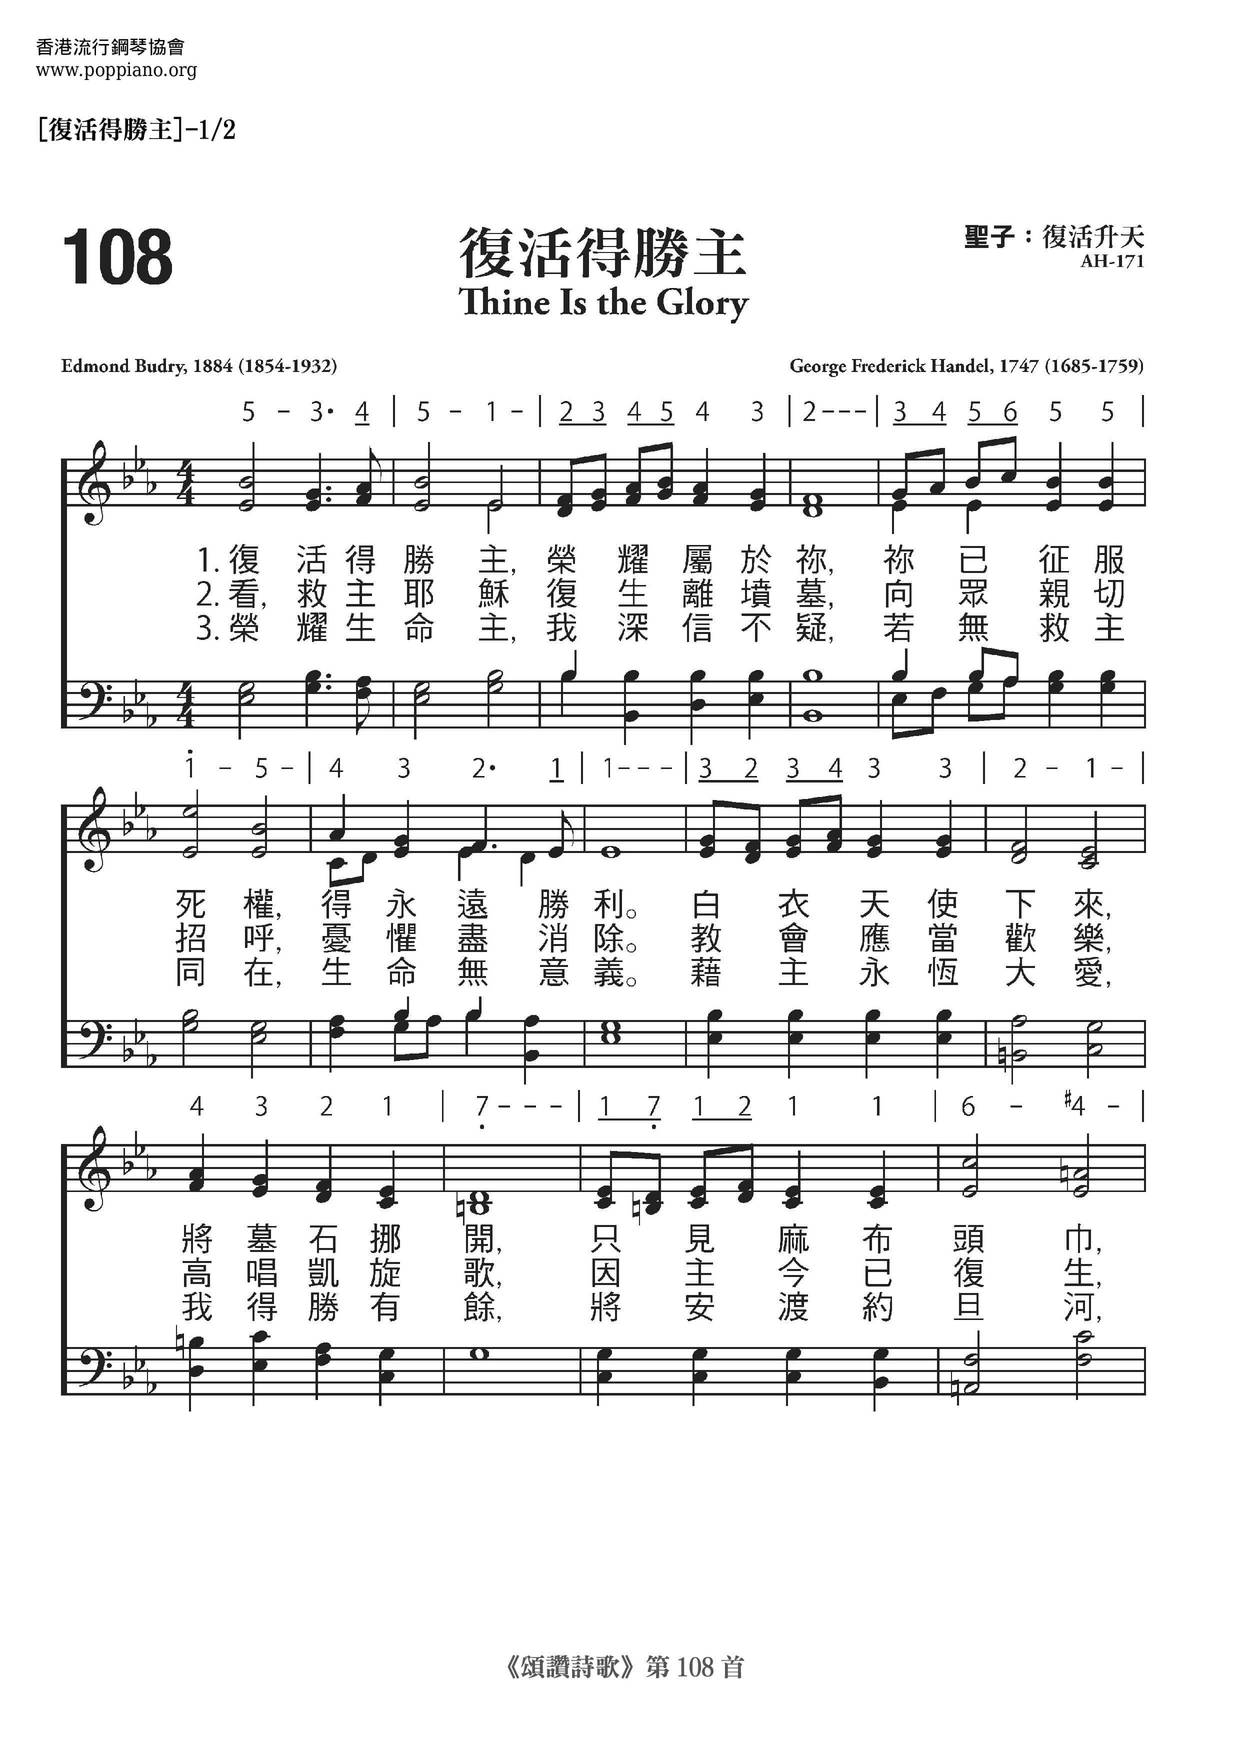 Thine Is The Glory Score